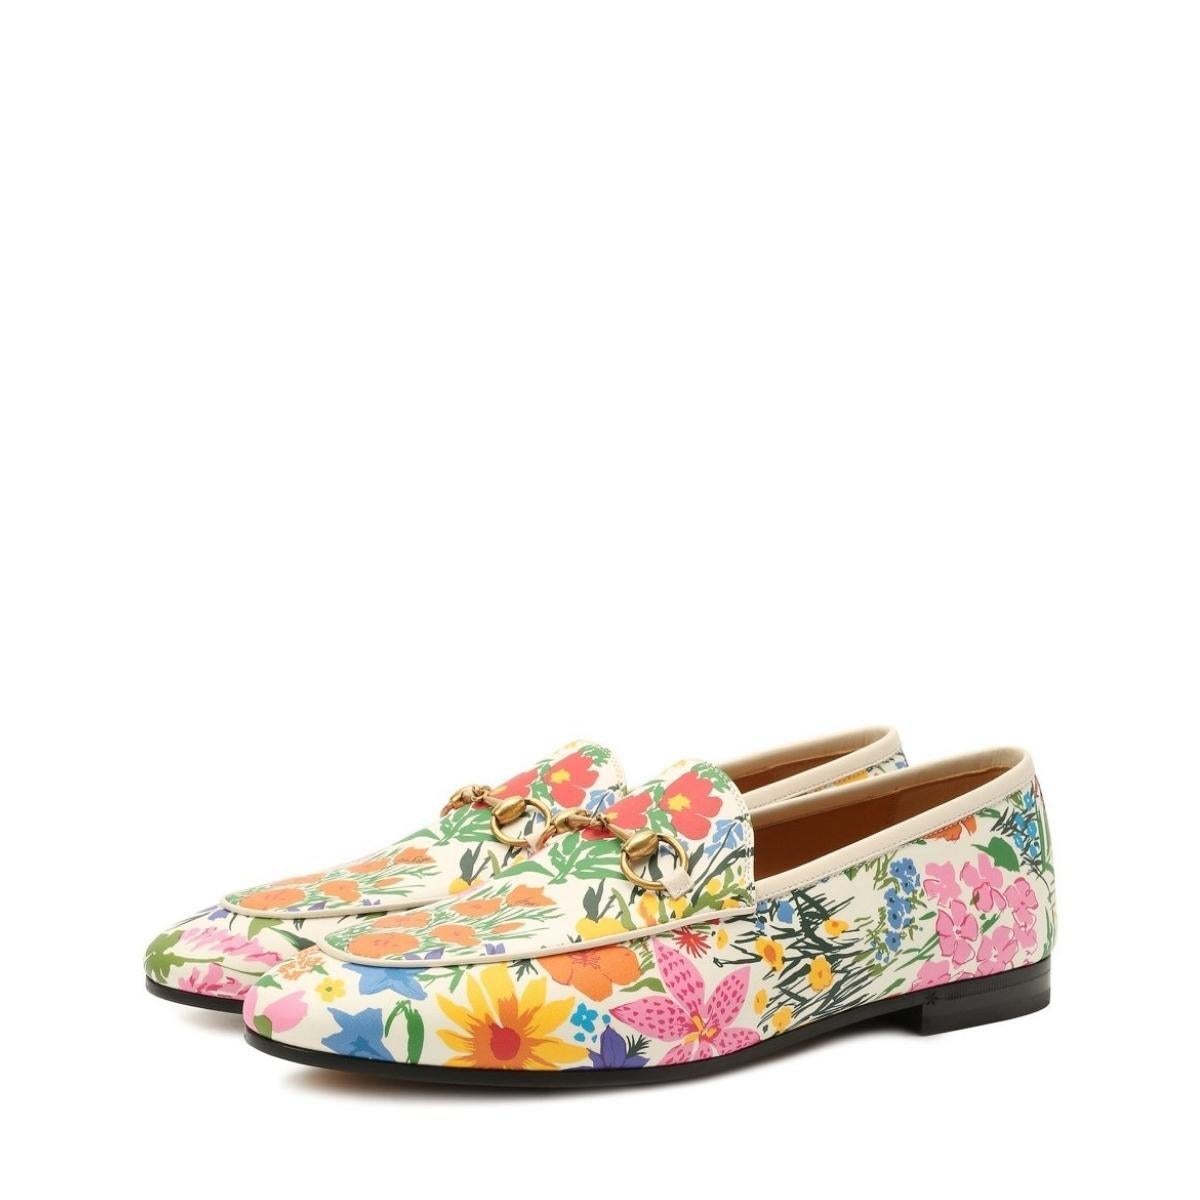 A floral print from the archives of designer Ken Scott (AKA the Fashion Gardener) pretties up this apron-toe loafer polished with an antiqued horsebit.
Block heel
Slip-on
Square toe
Material: calfskin
Heel: 0.5